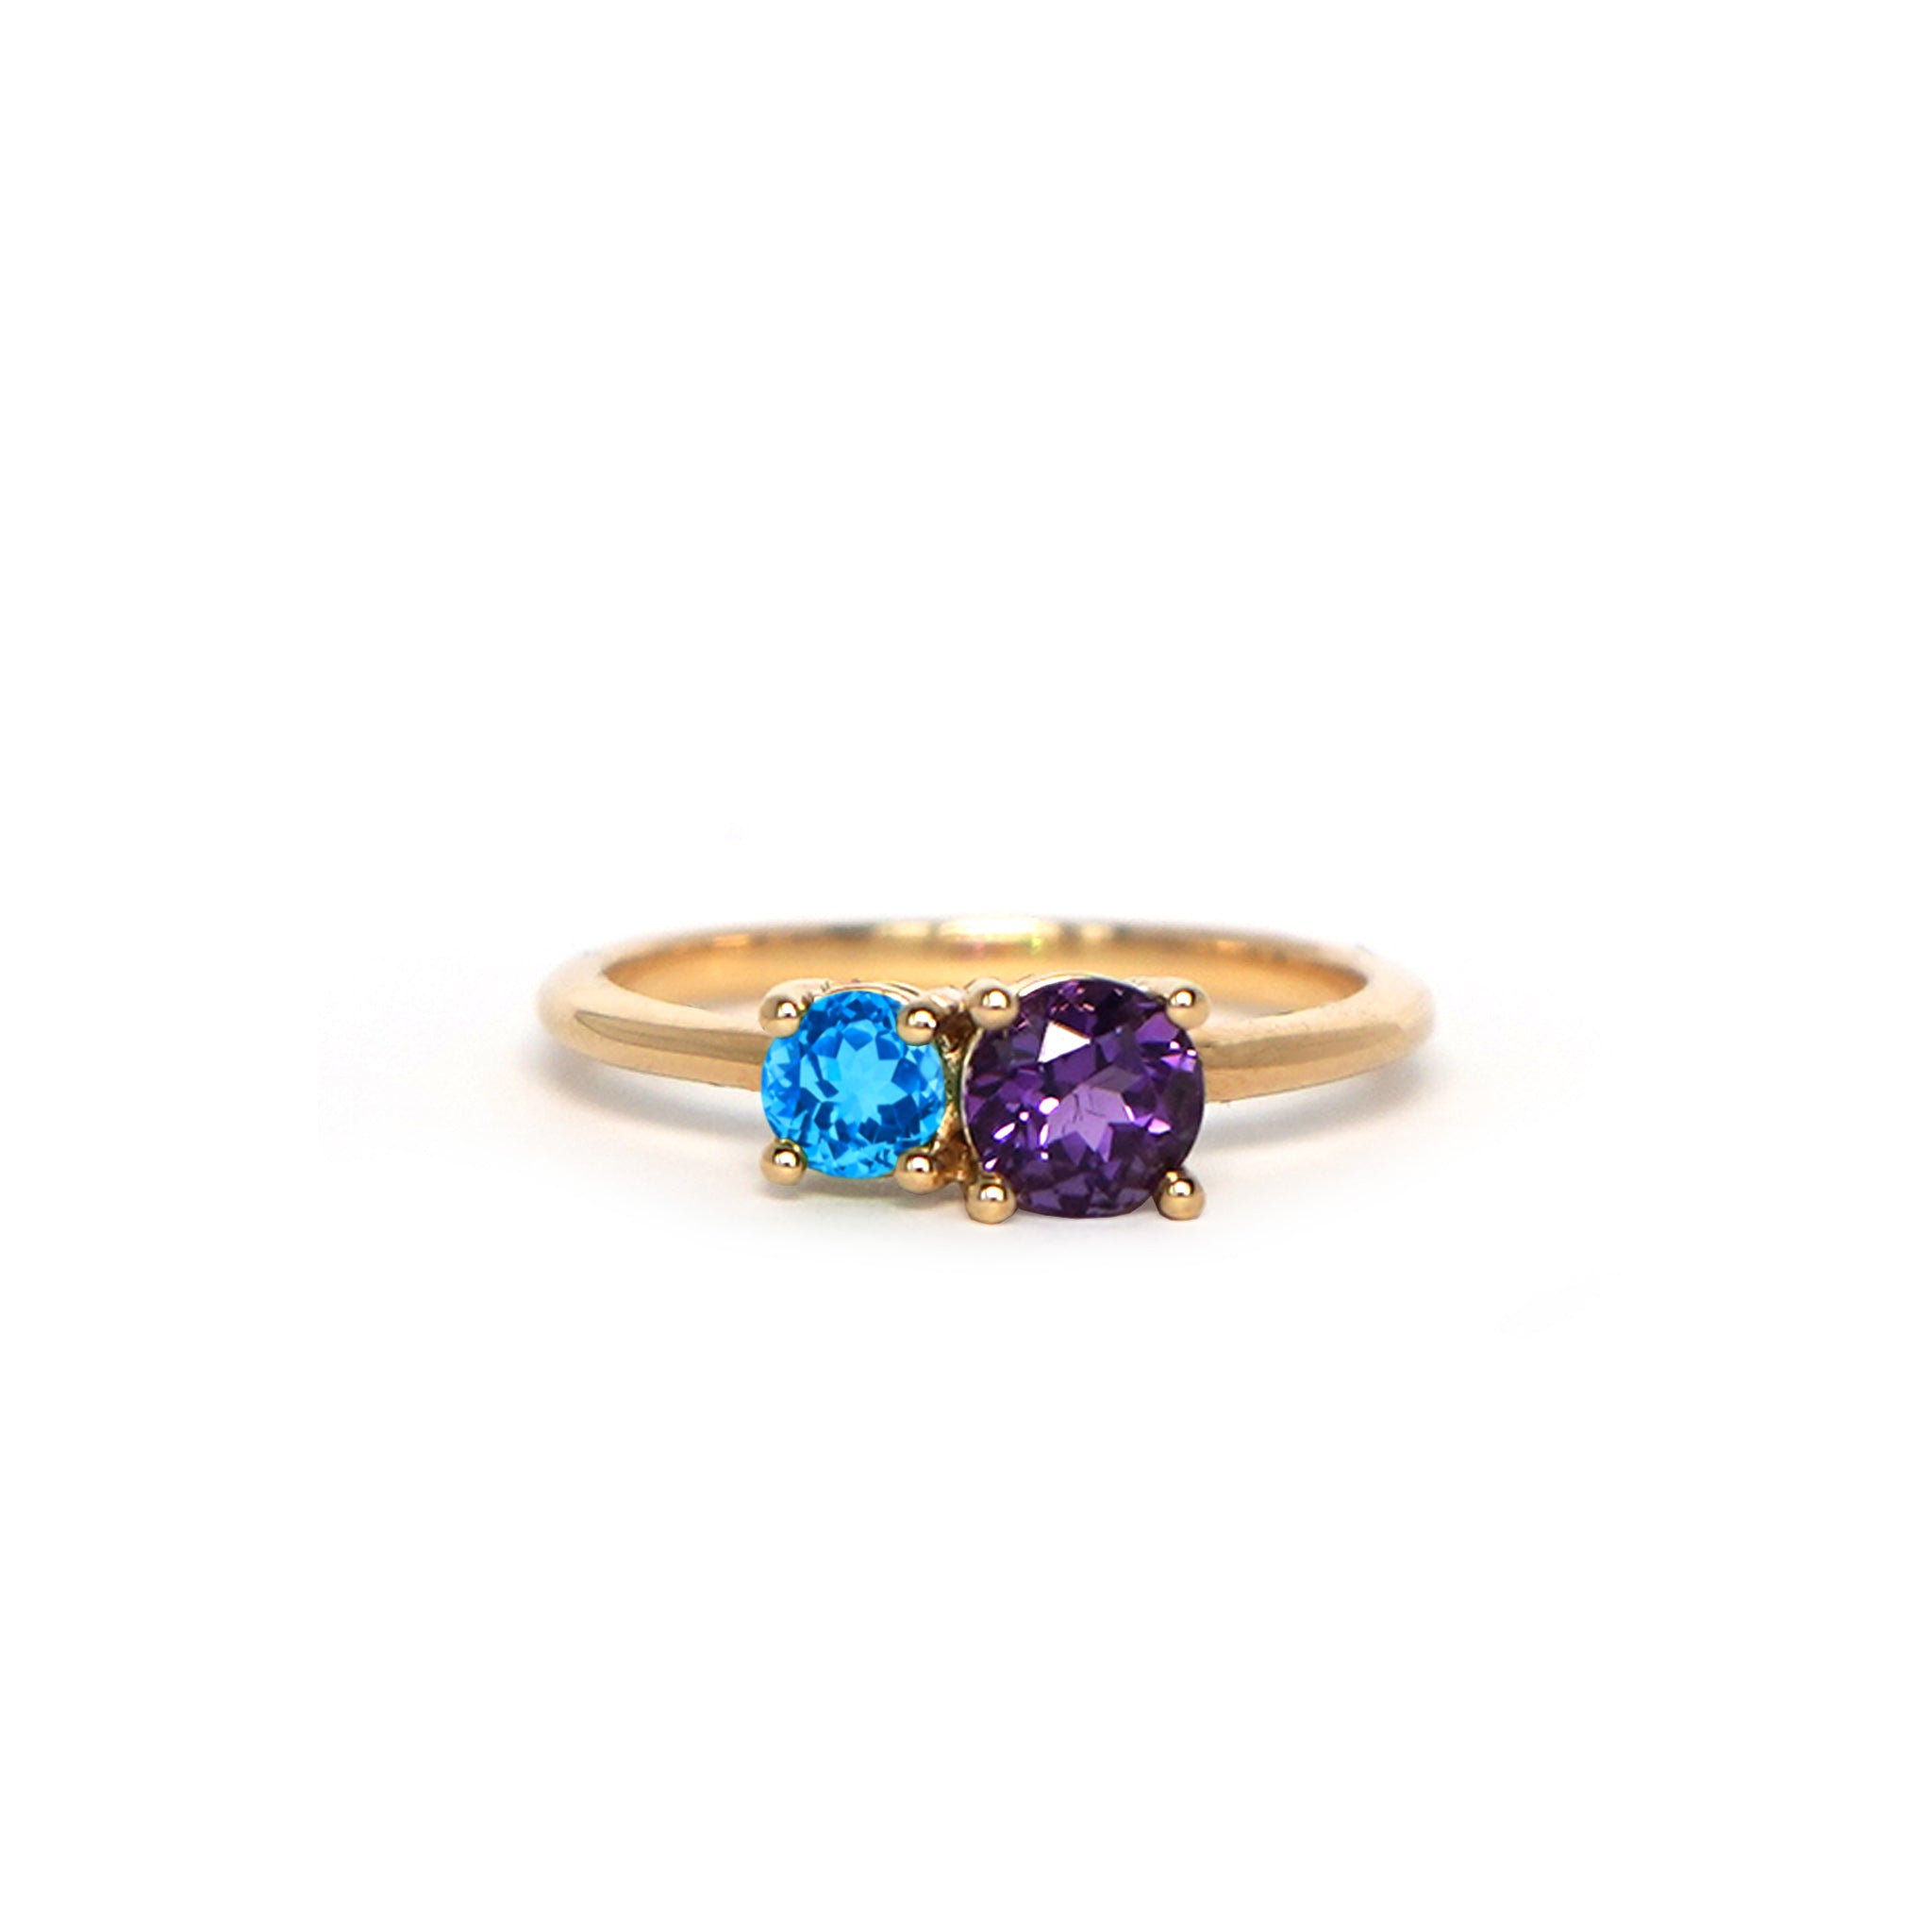 Lico Jewelry Lost Galaxy Ring with Amethyst and Swiss blue topaz on yellow gold